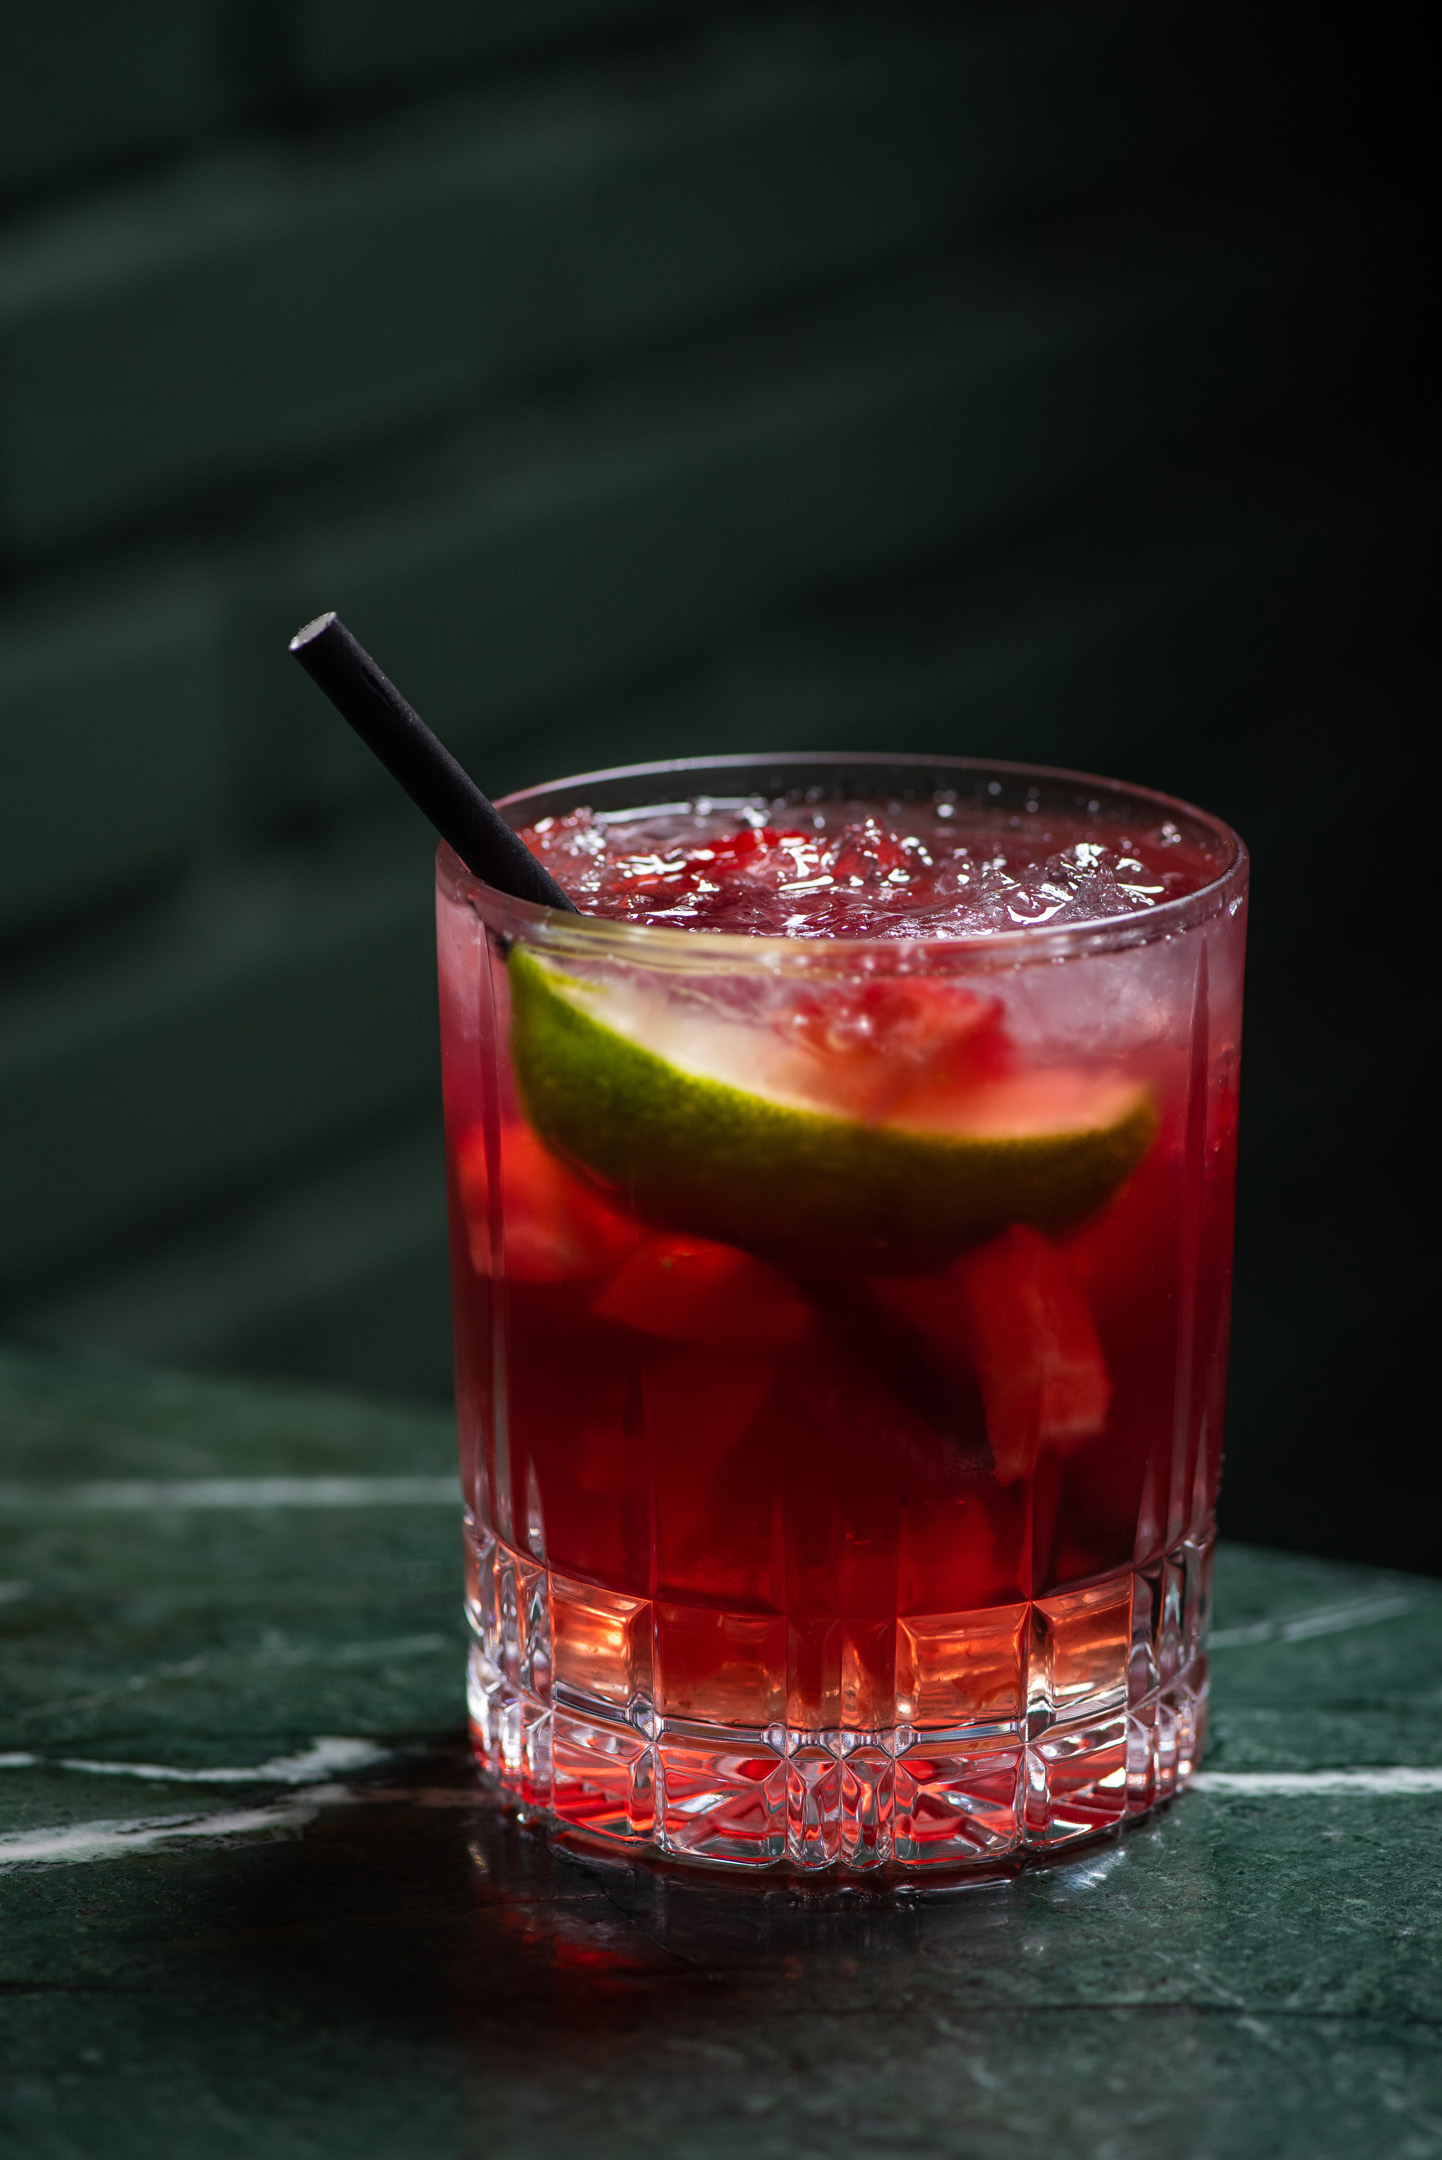 he signature Cilicia Cocktail, a refreshing and colorful drink.